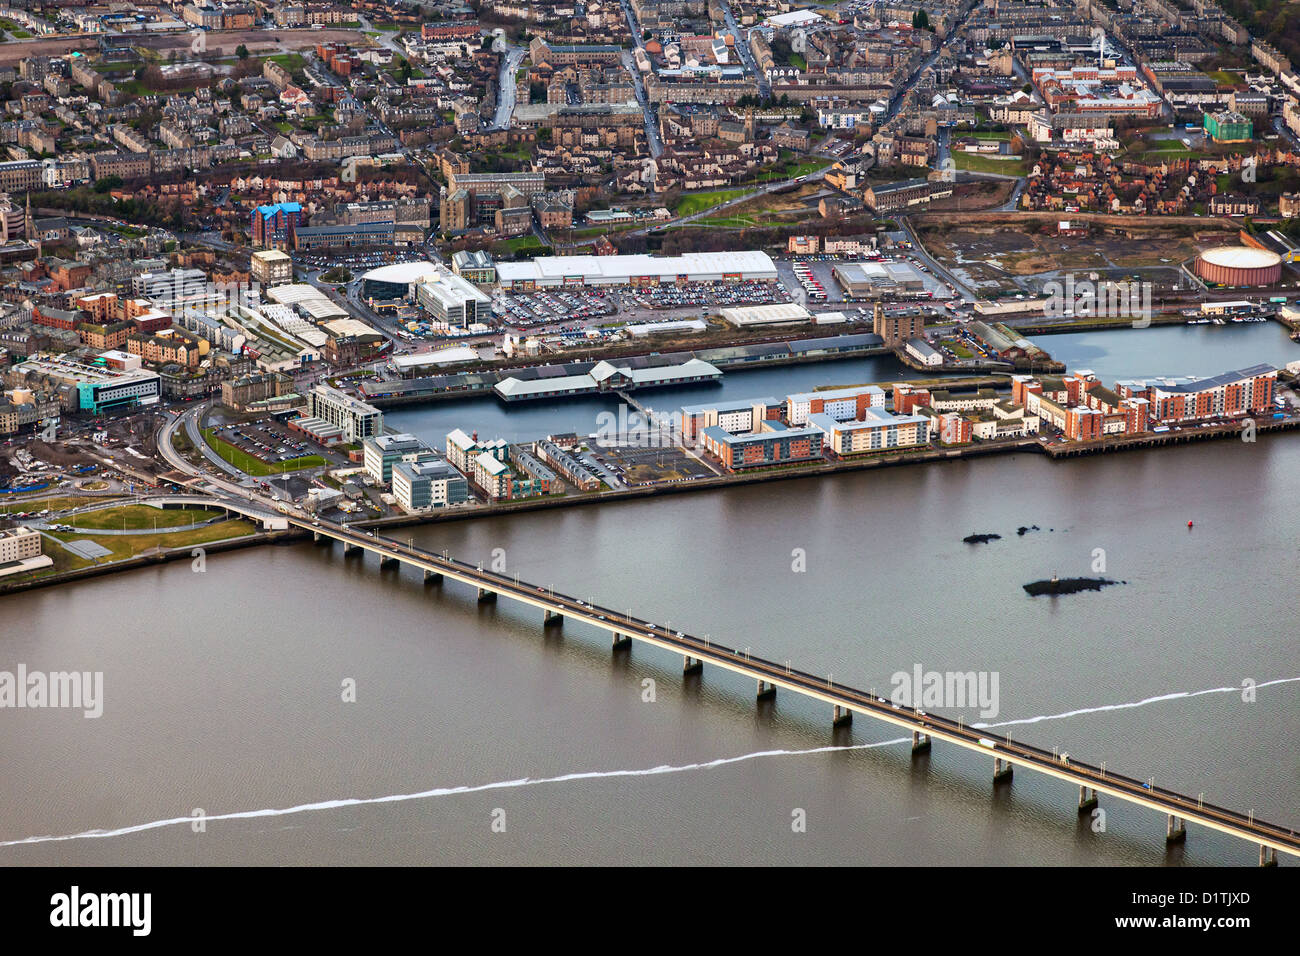 Aerial view of Dundee, the River Tay and the Road/Rail Bridge(s) Stock Photo